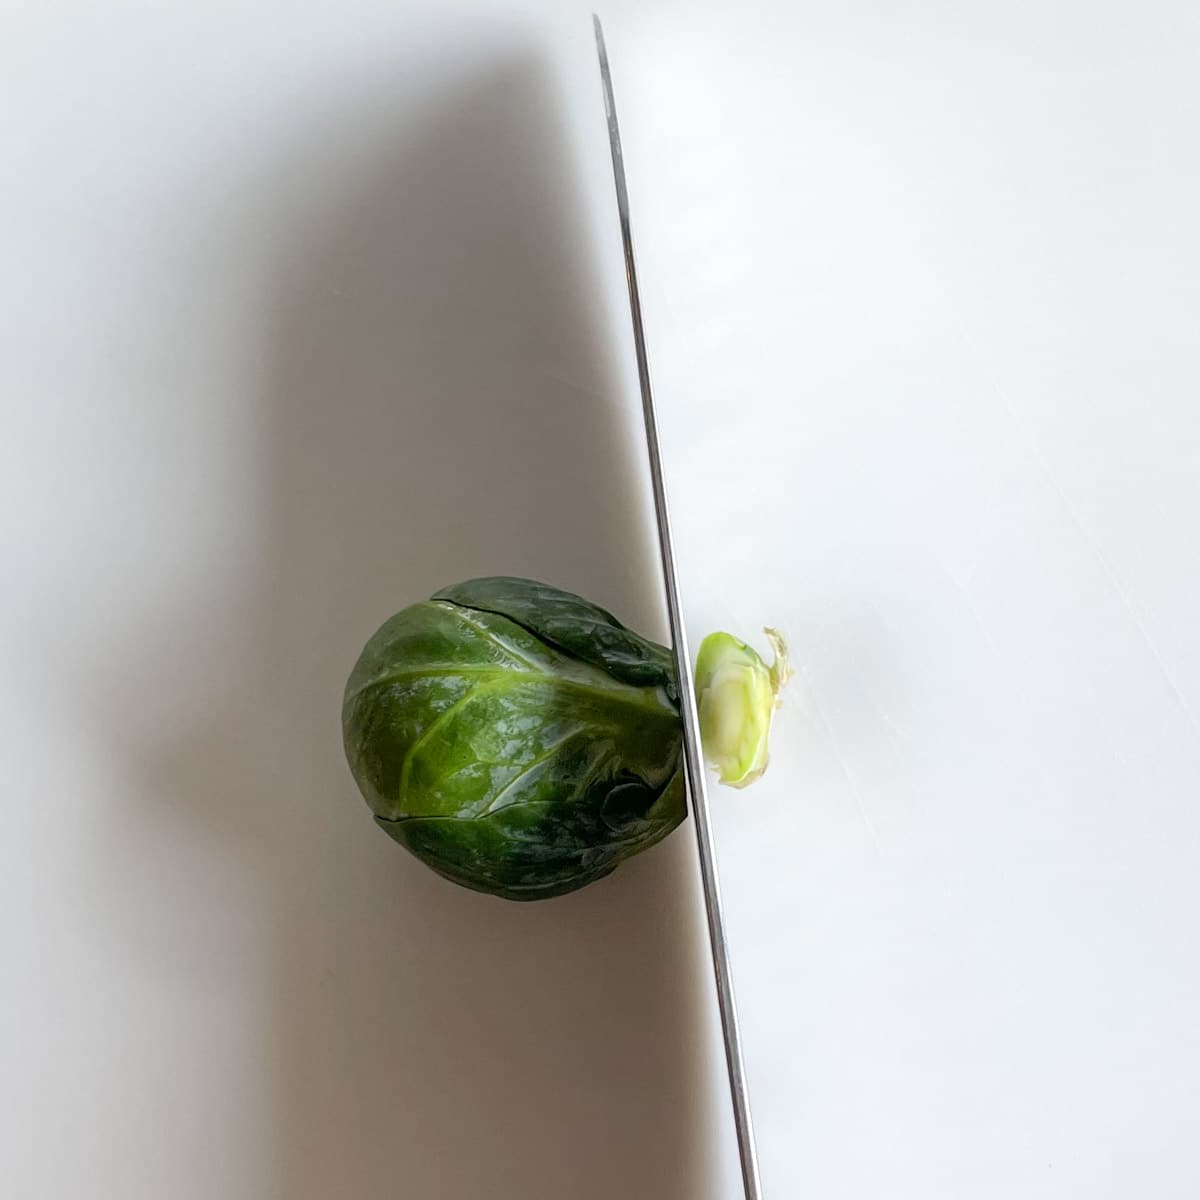 The base of a brussels sprouts is cut off with a kitchen knife.